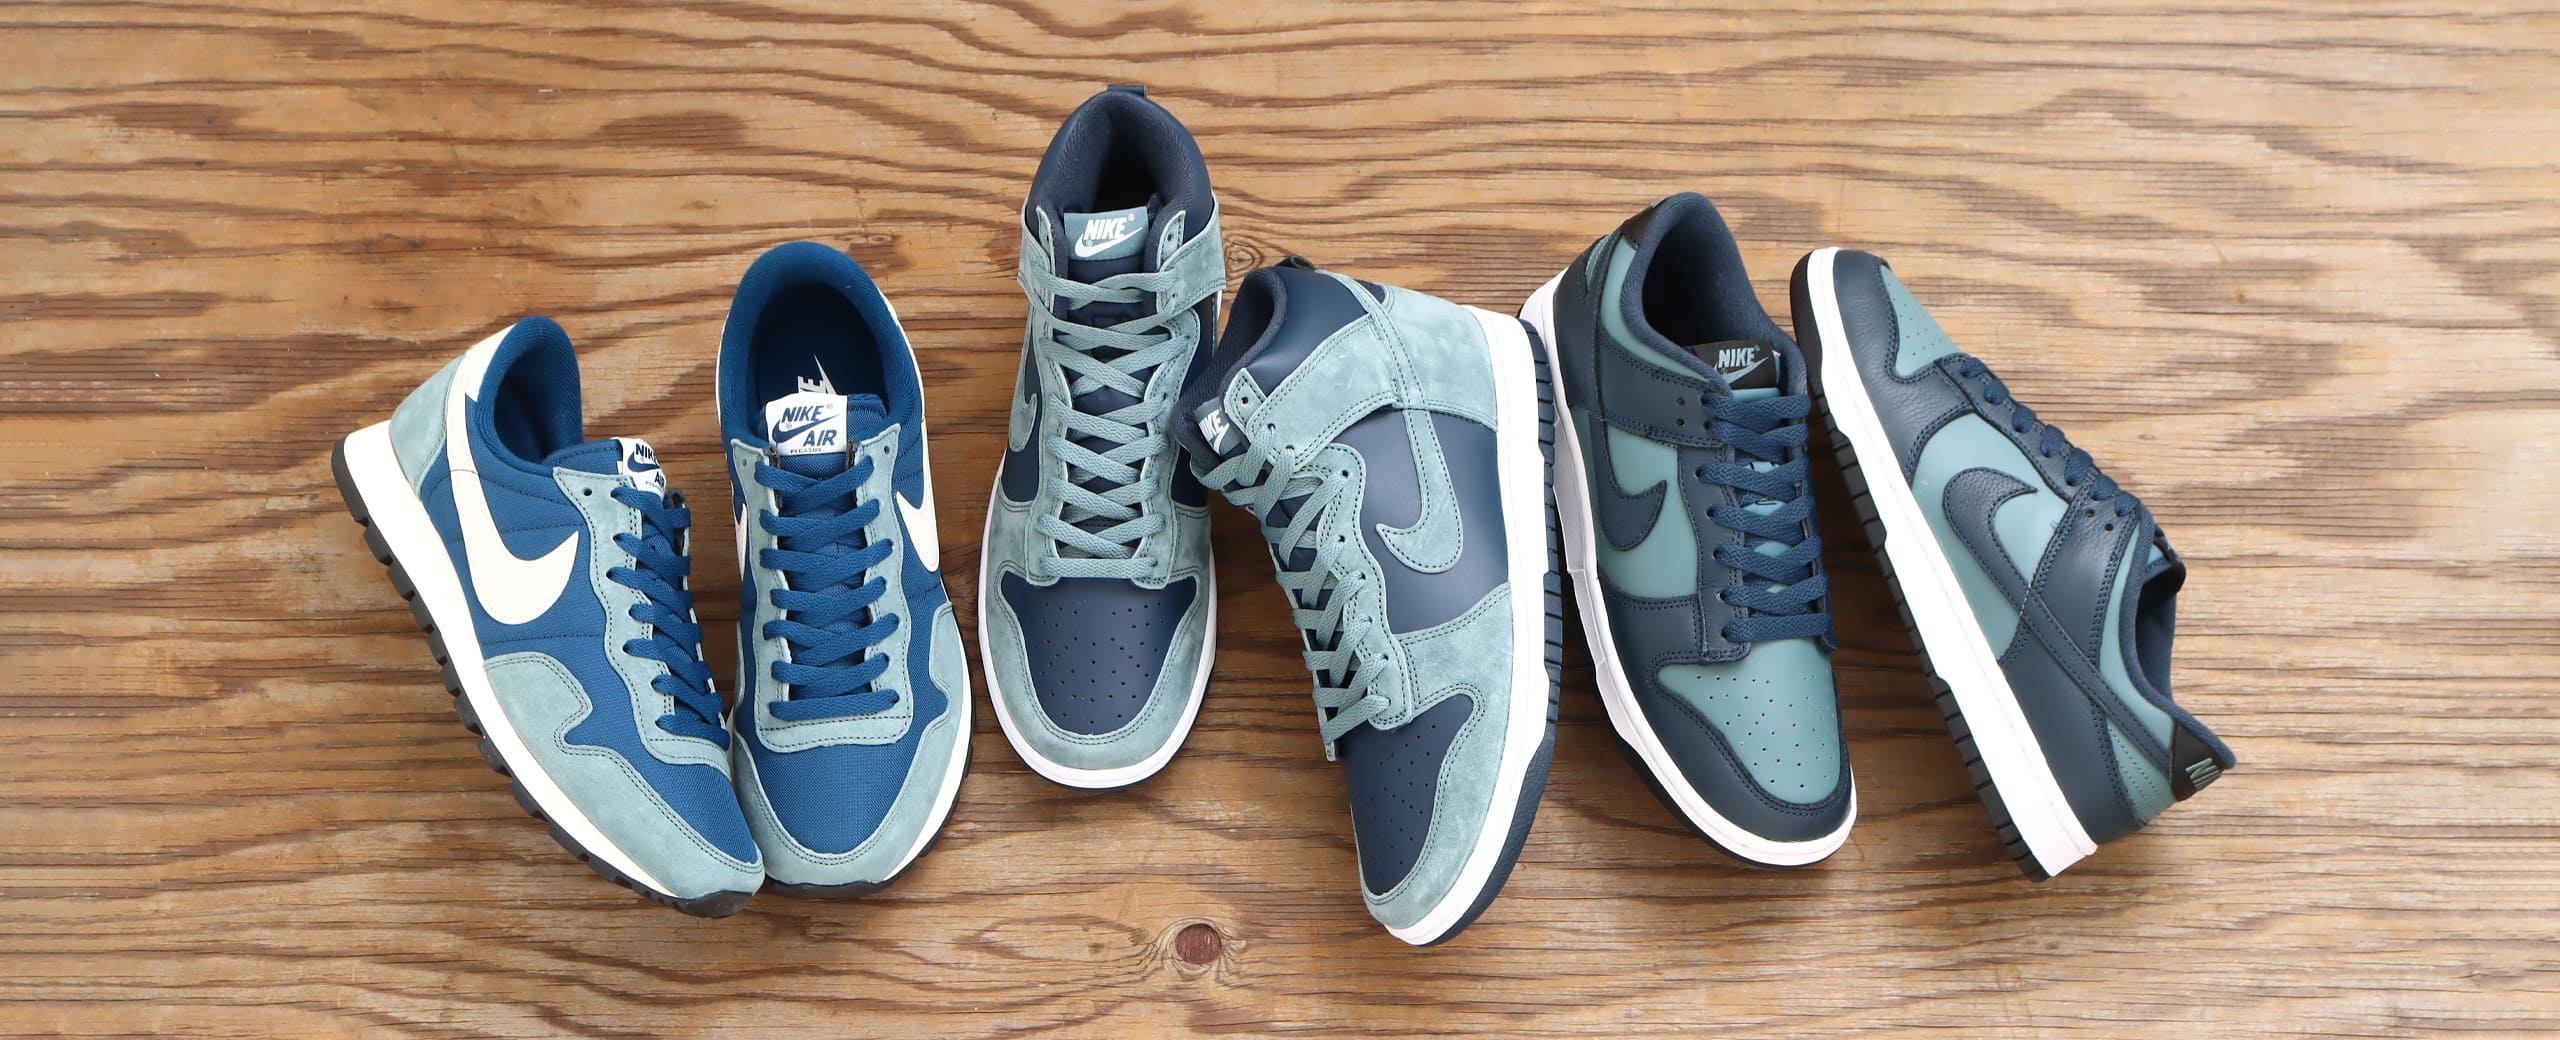 "NIKE "Armory Navy and Mineral Slate""